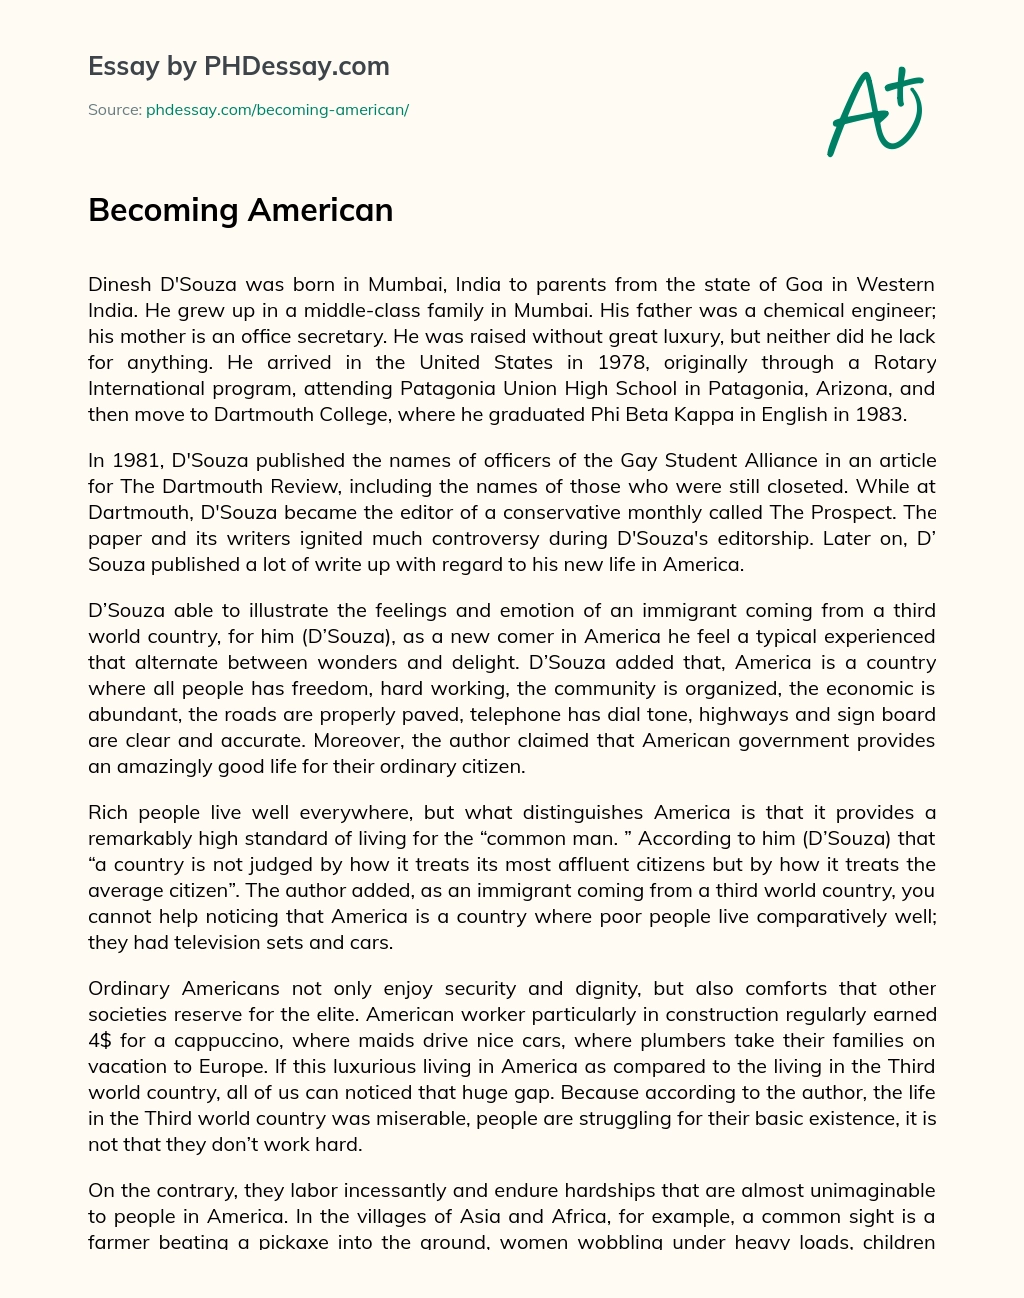 Becoming American essay